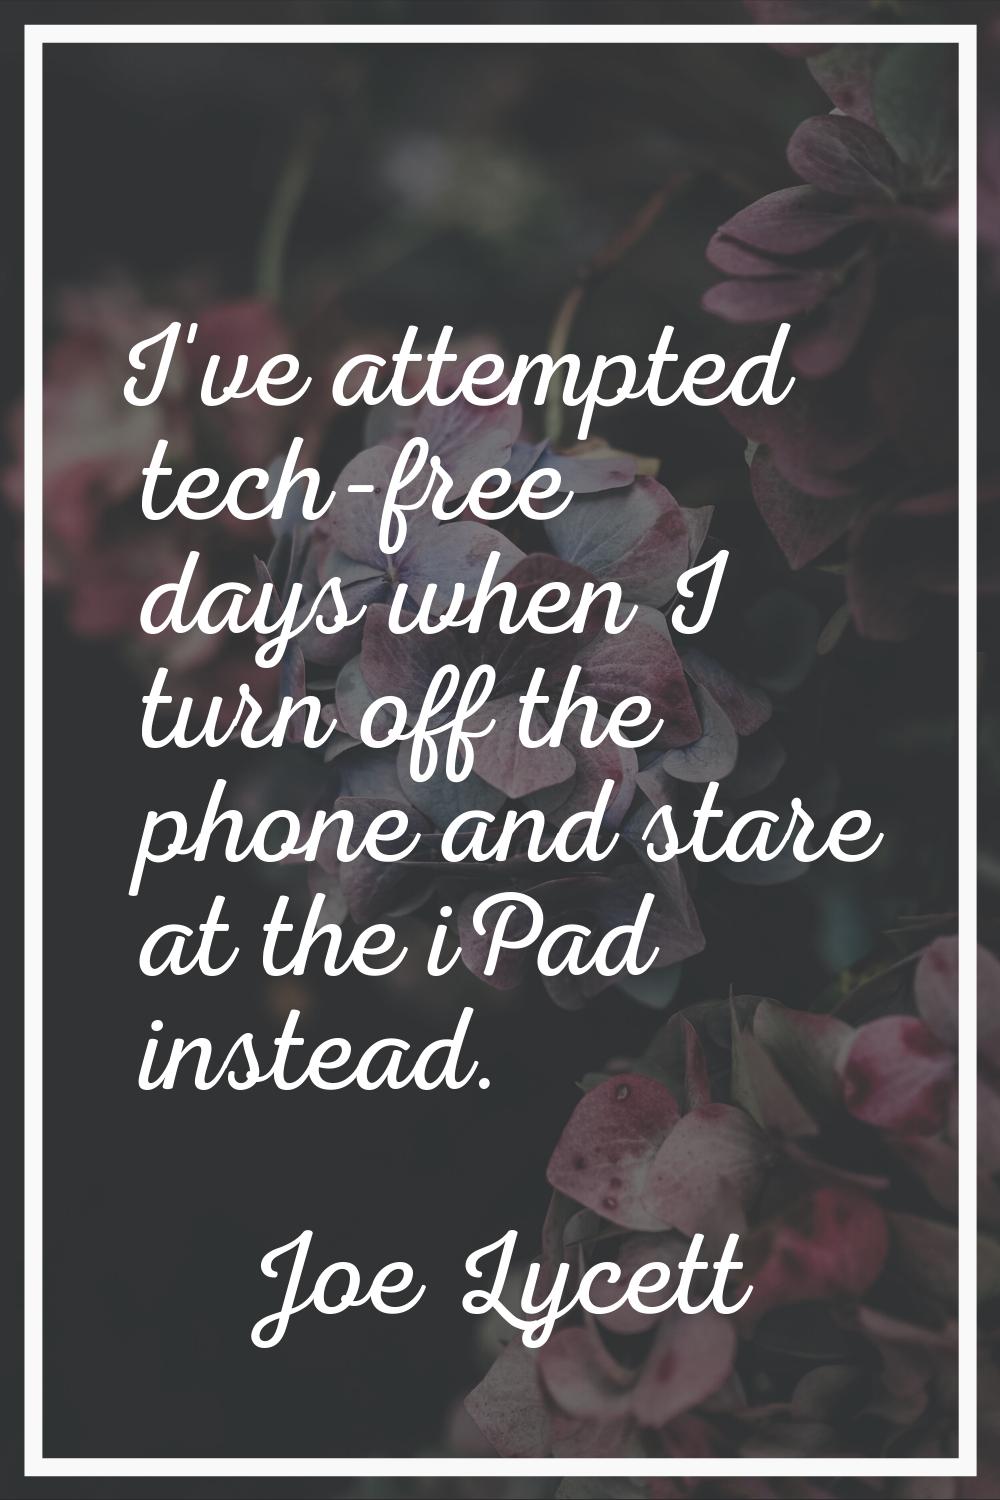 I've attempted tech-free days when I turn off the phone and stare at the iPad instead.